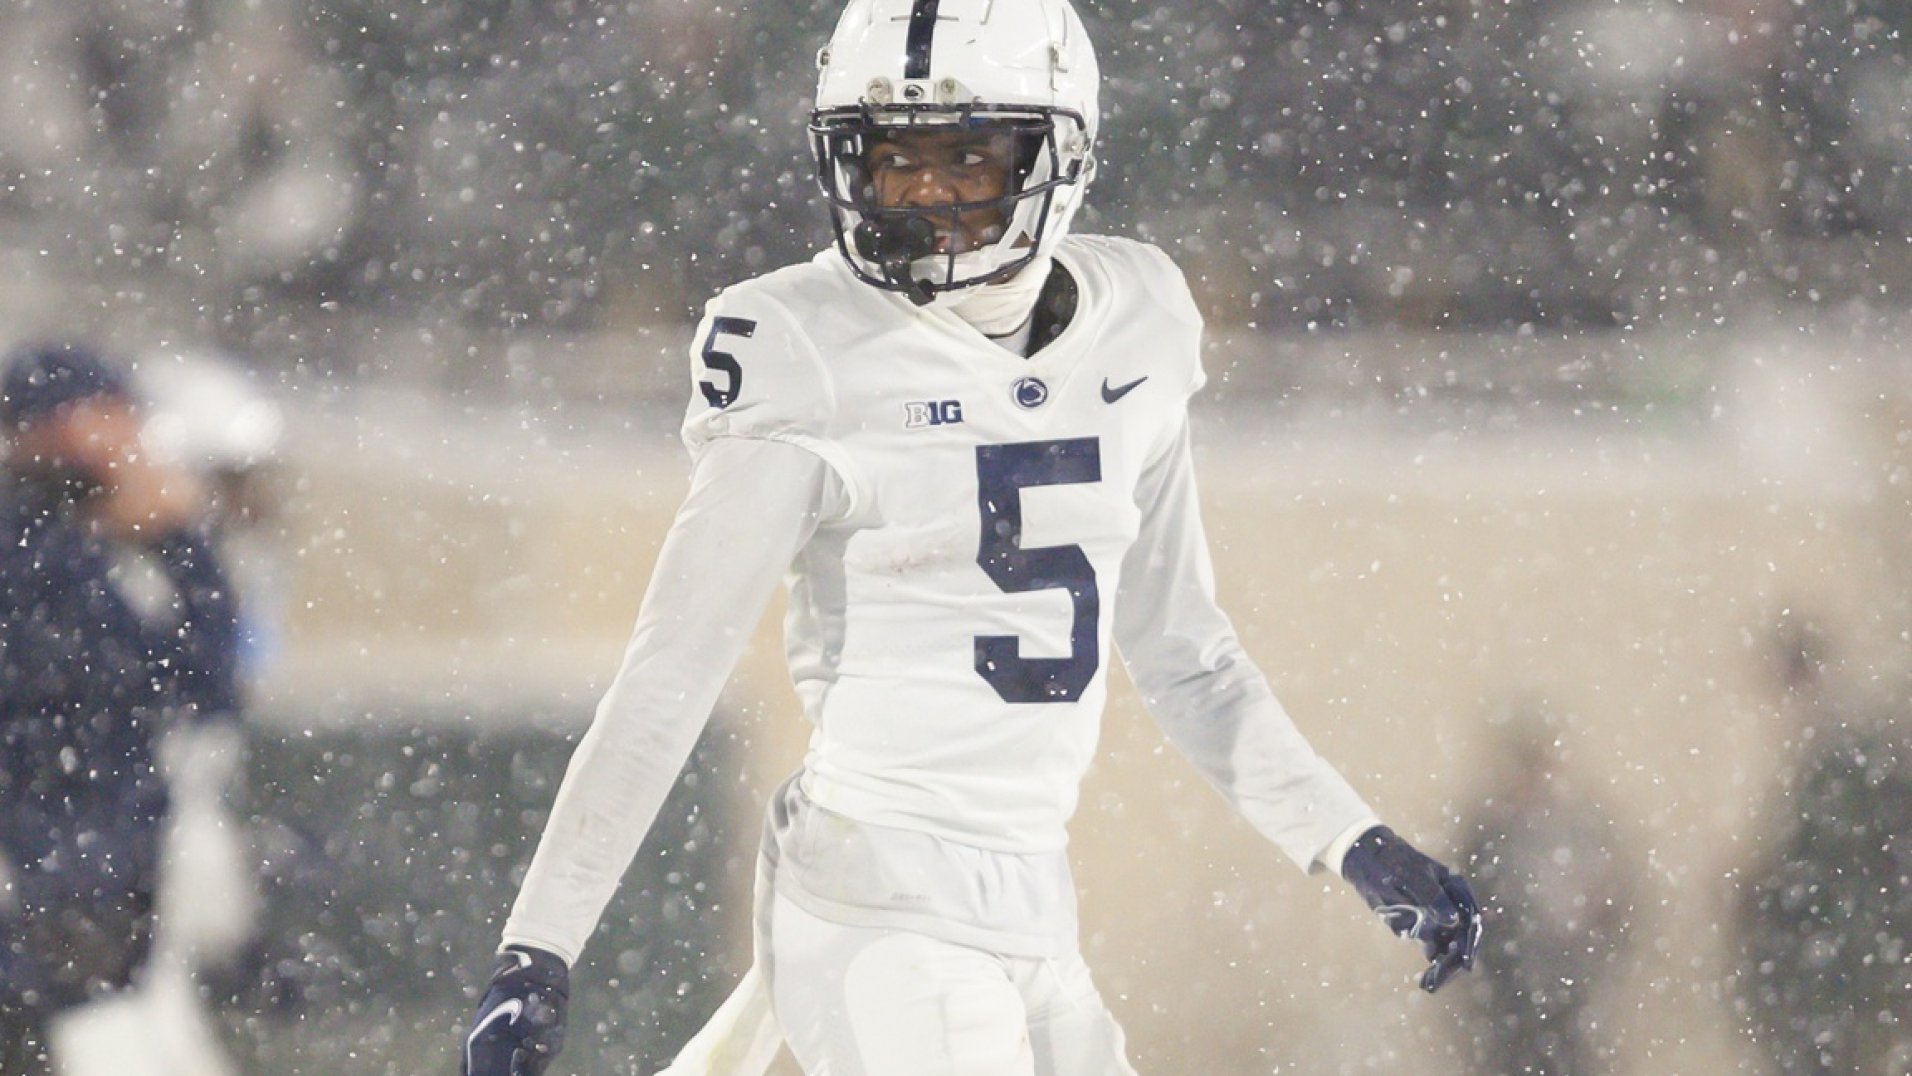 2022 NFL Draft Player Comparisons Penn State WR Jahan Dotson emerges